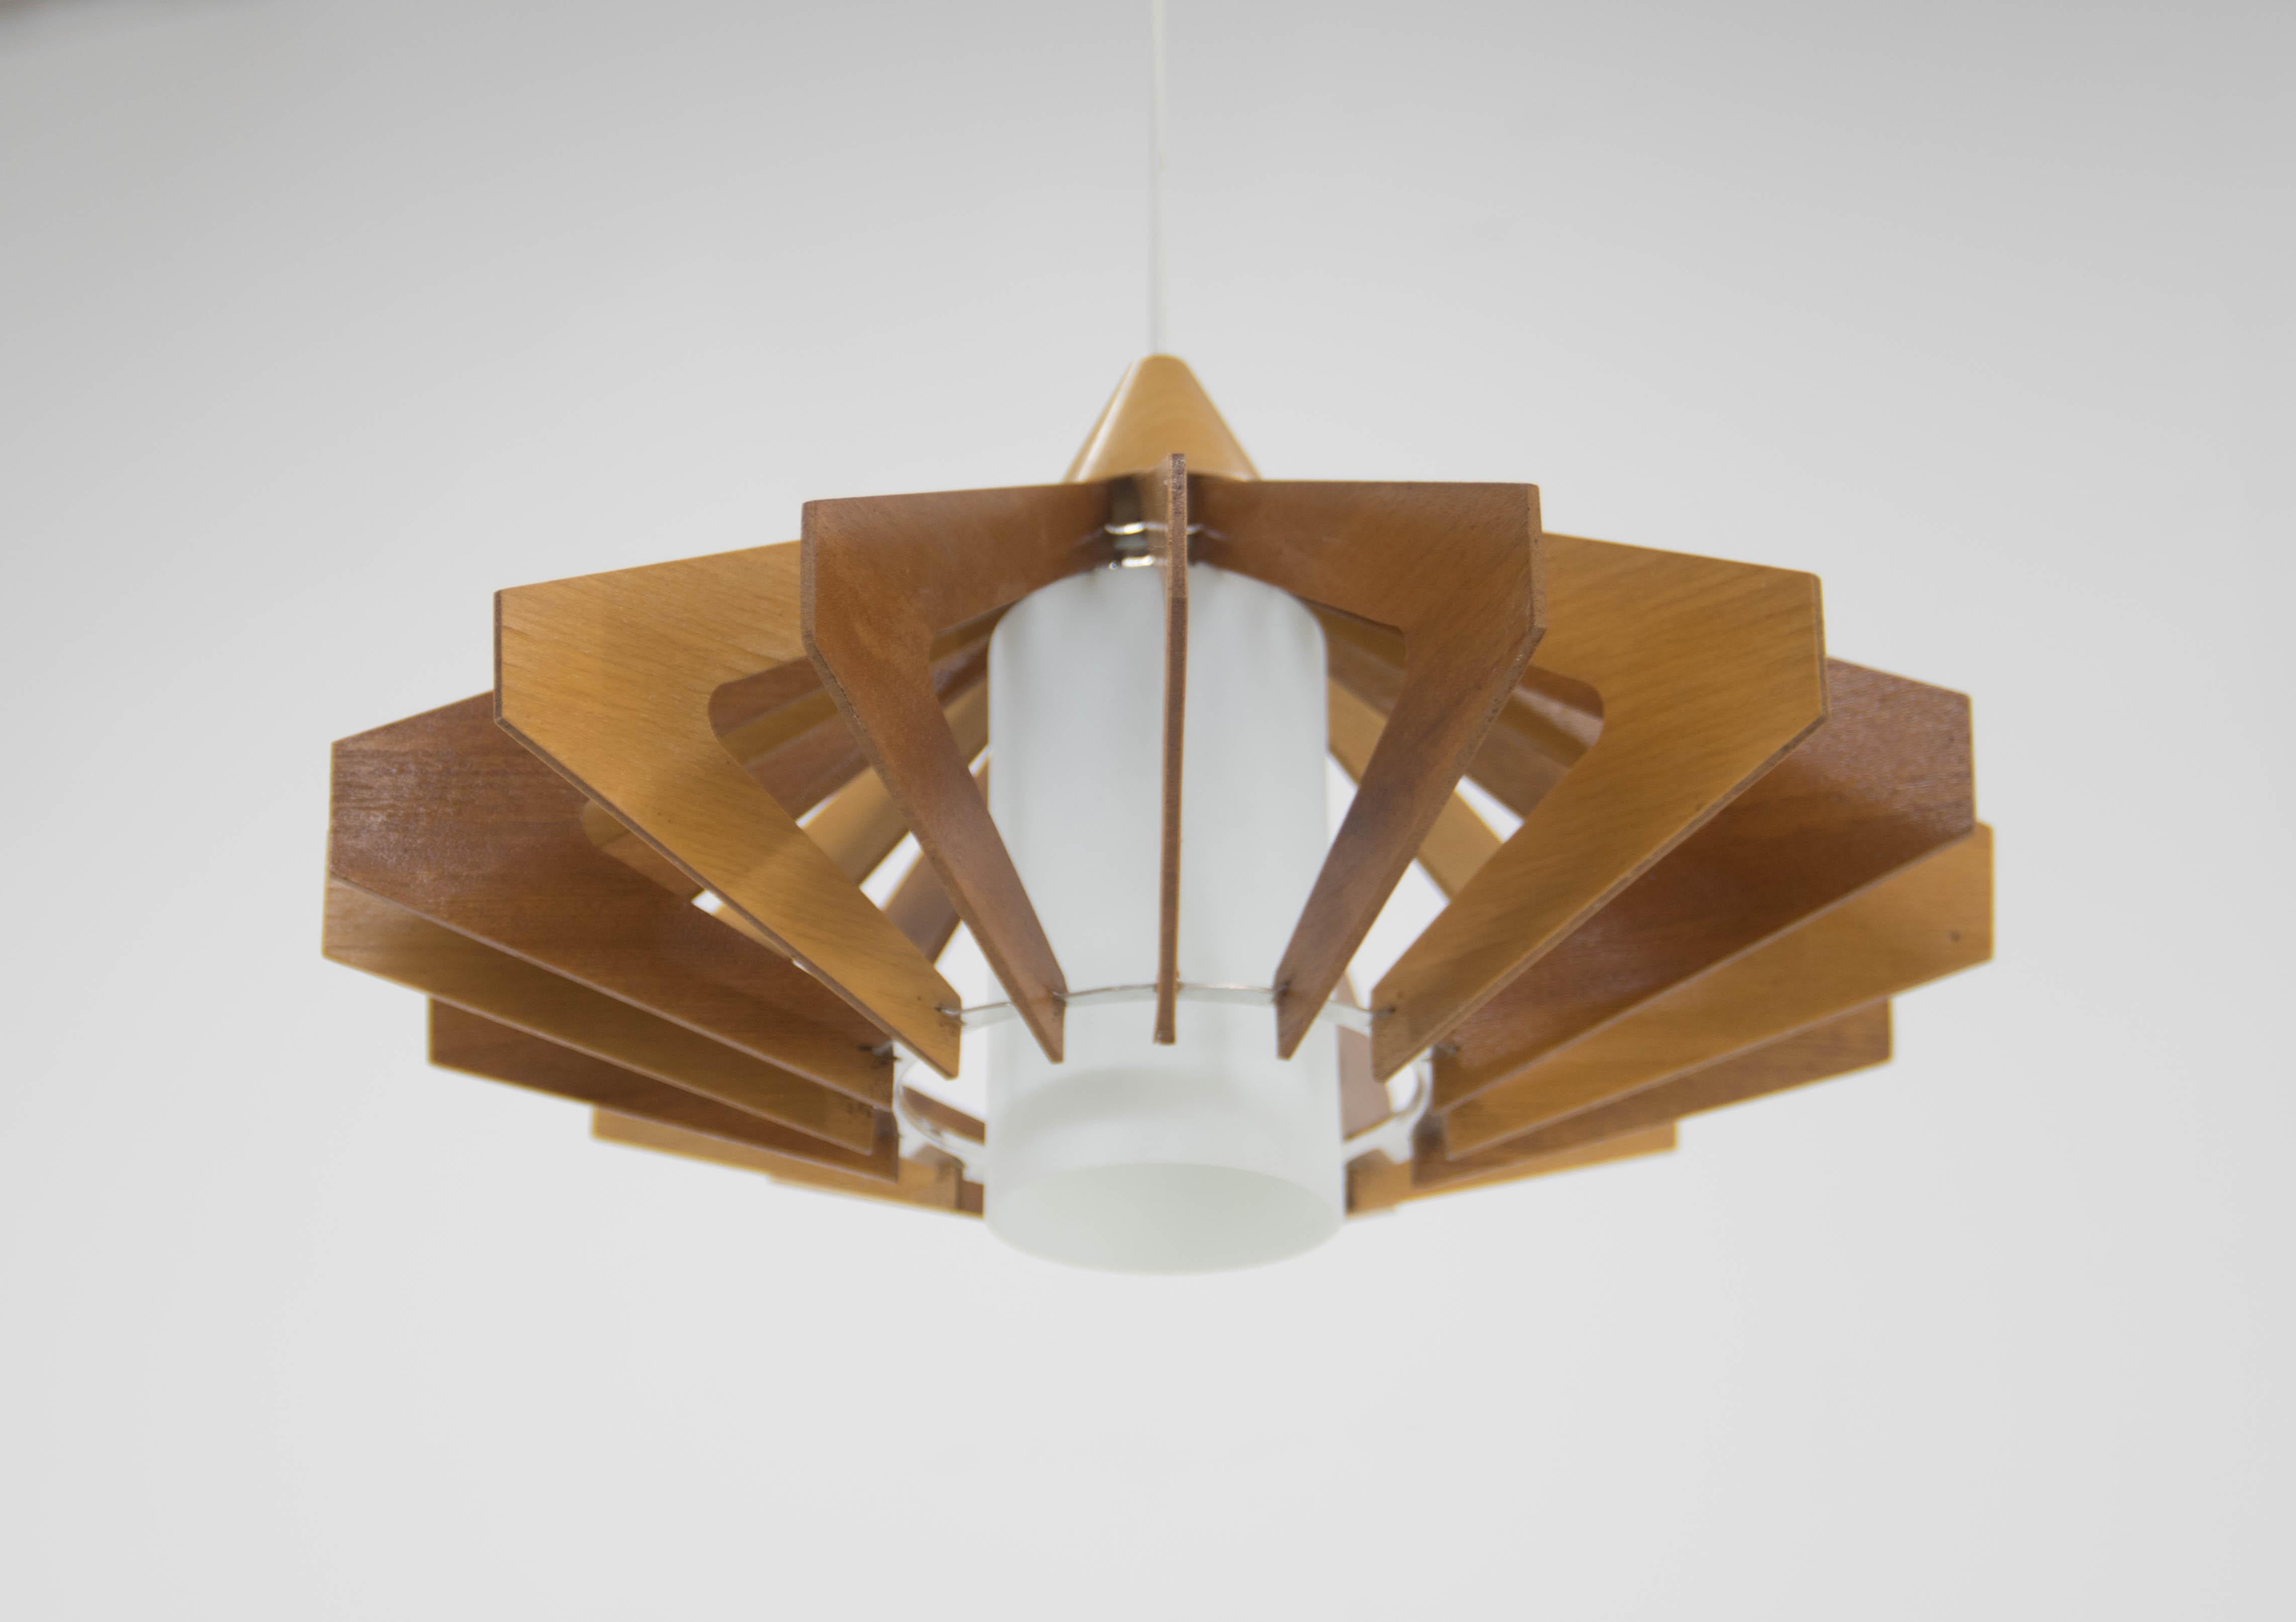 Plywood and glass chandelier in perfect condition.
Plywood leaves are fixed in a metal rings.
Opaline glass shade without any damage.
Labeled
Height can be adjusted
1x40W, E25-E27 bulb
US wiring compatible.